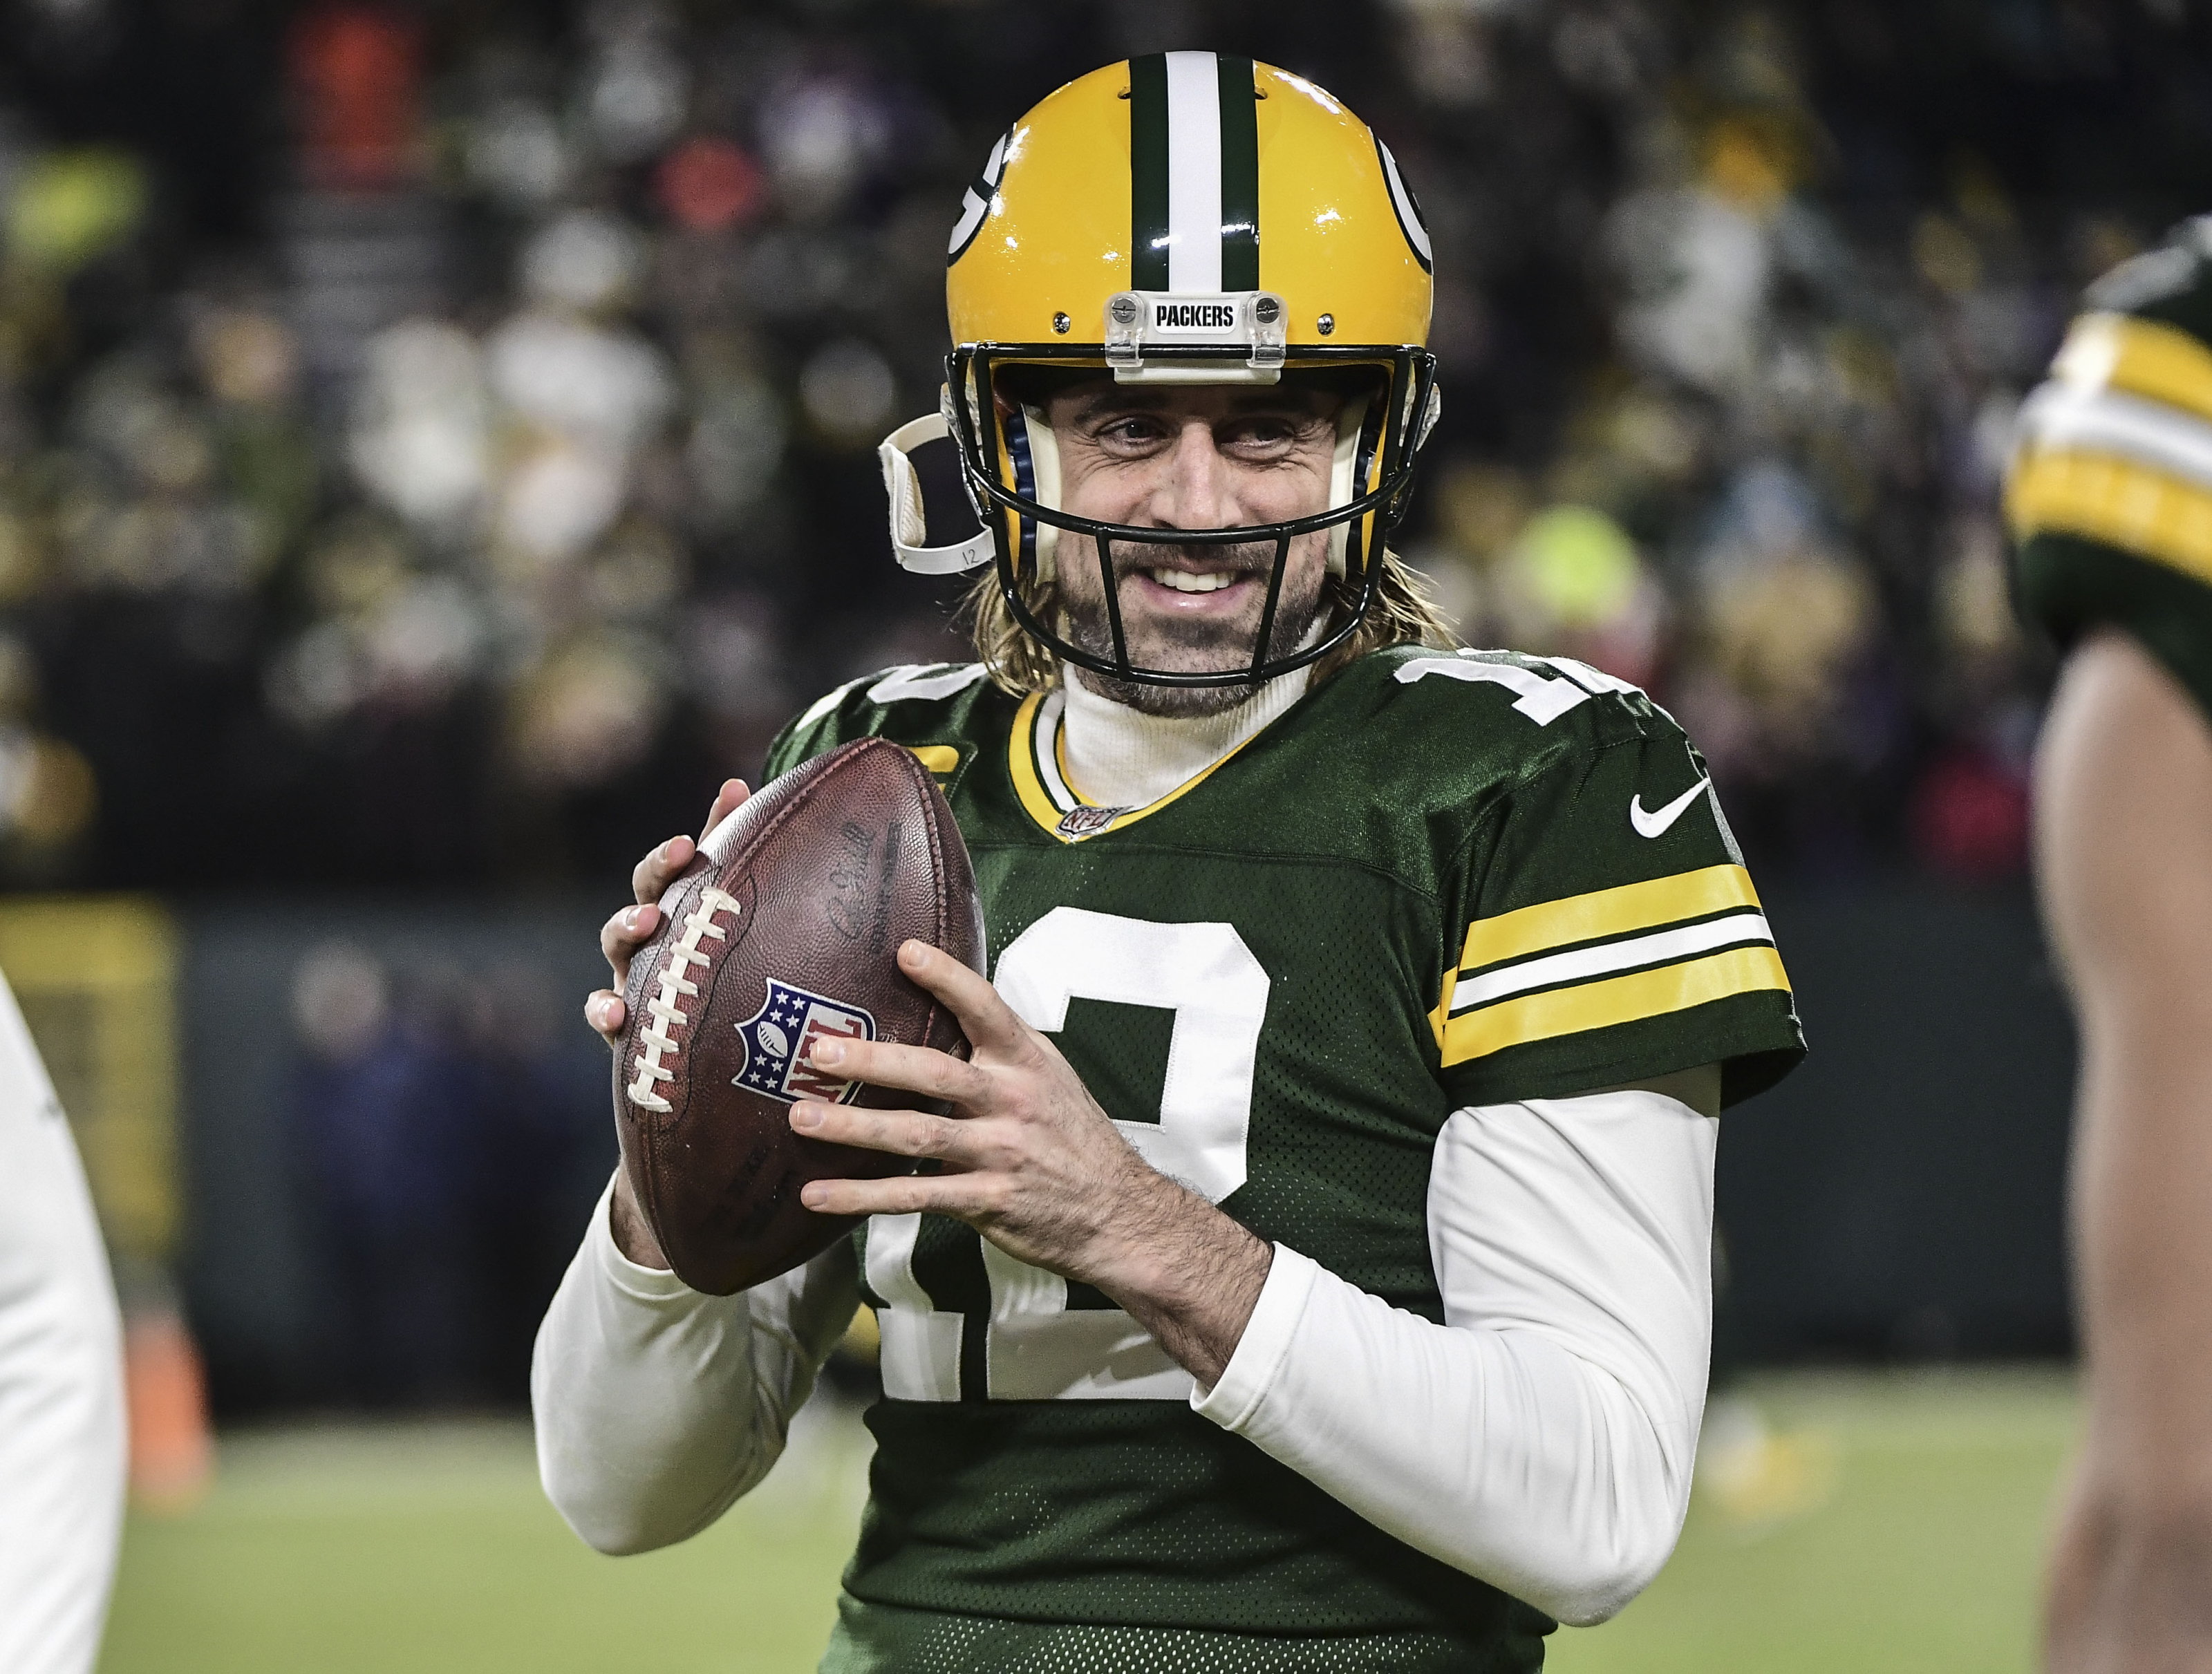 Final Thoughts on Green Bay Packers Heading into Playoffs